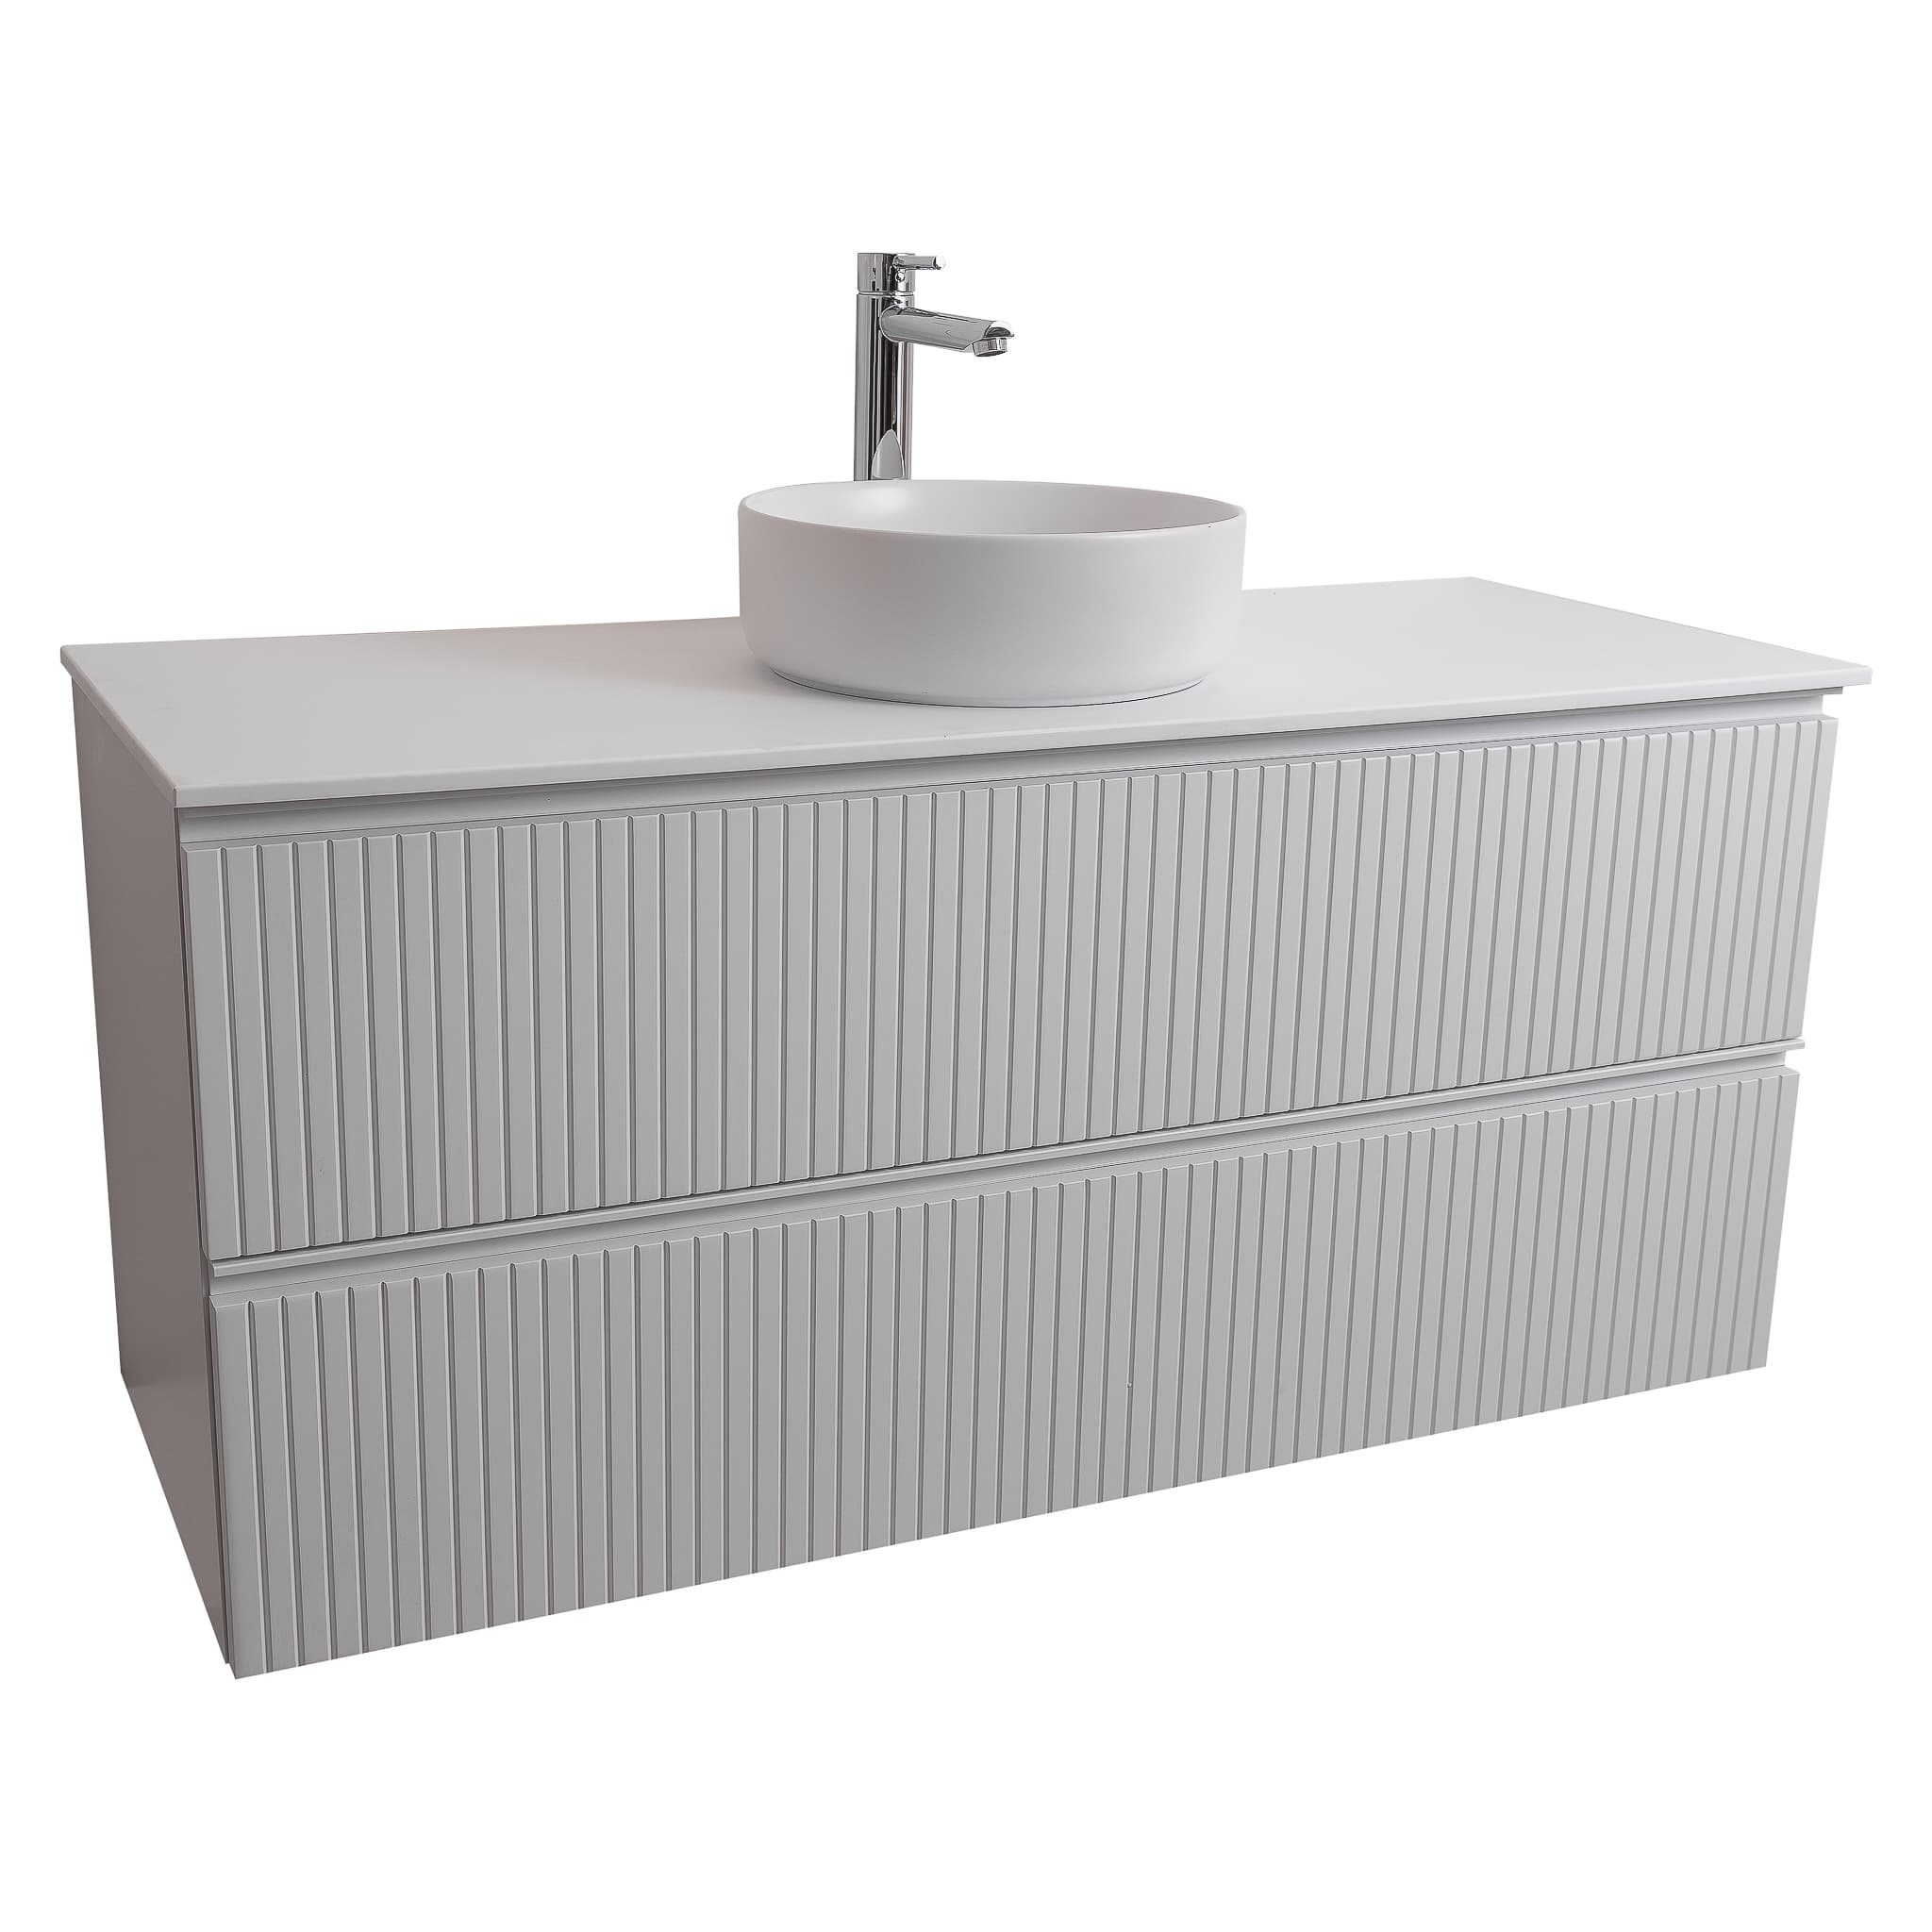 Ares 47.5 Matte White Cabinet, Ares White Top And Ares White Ceramic Basin, Wall Mounted Modern Vanity Set